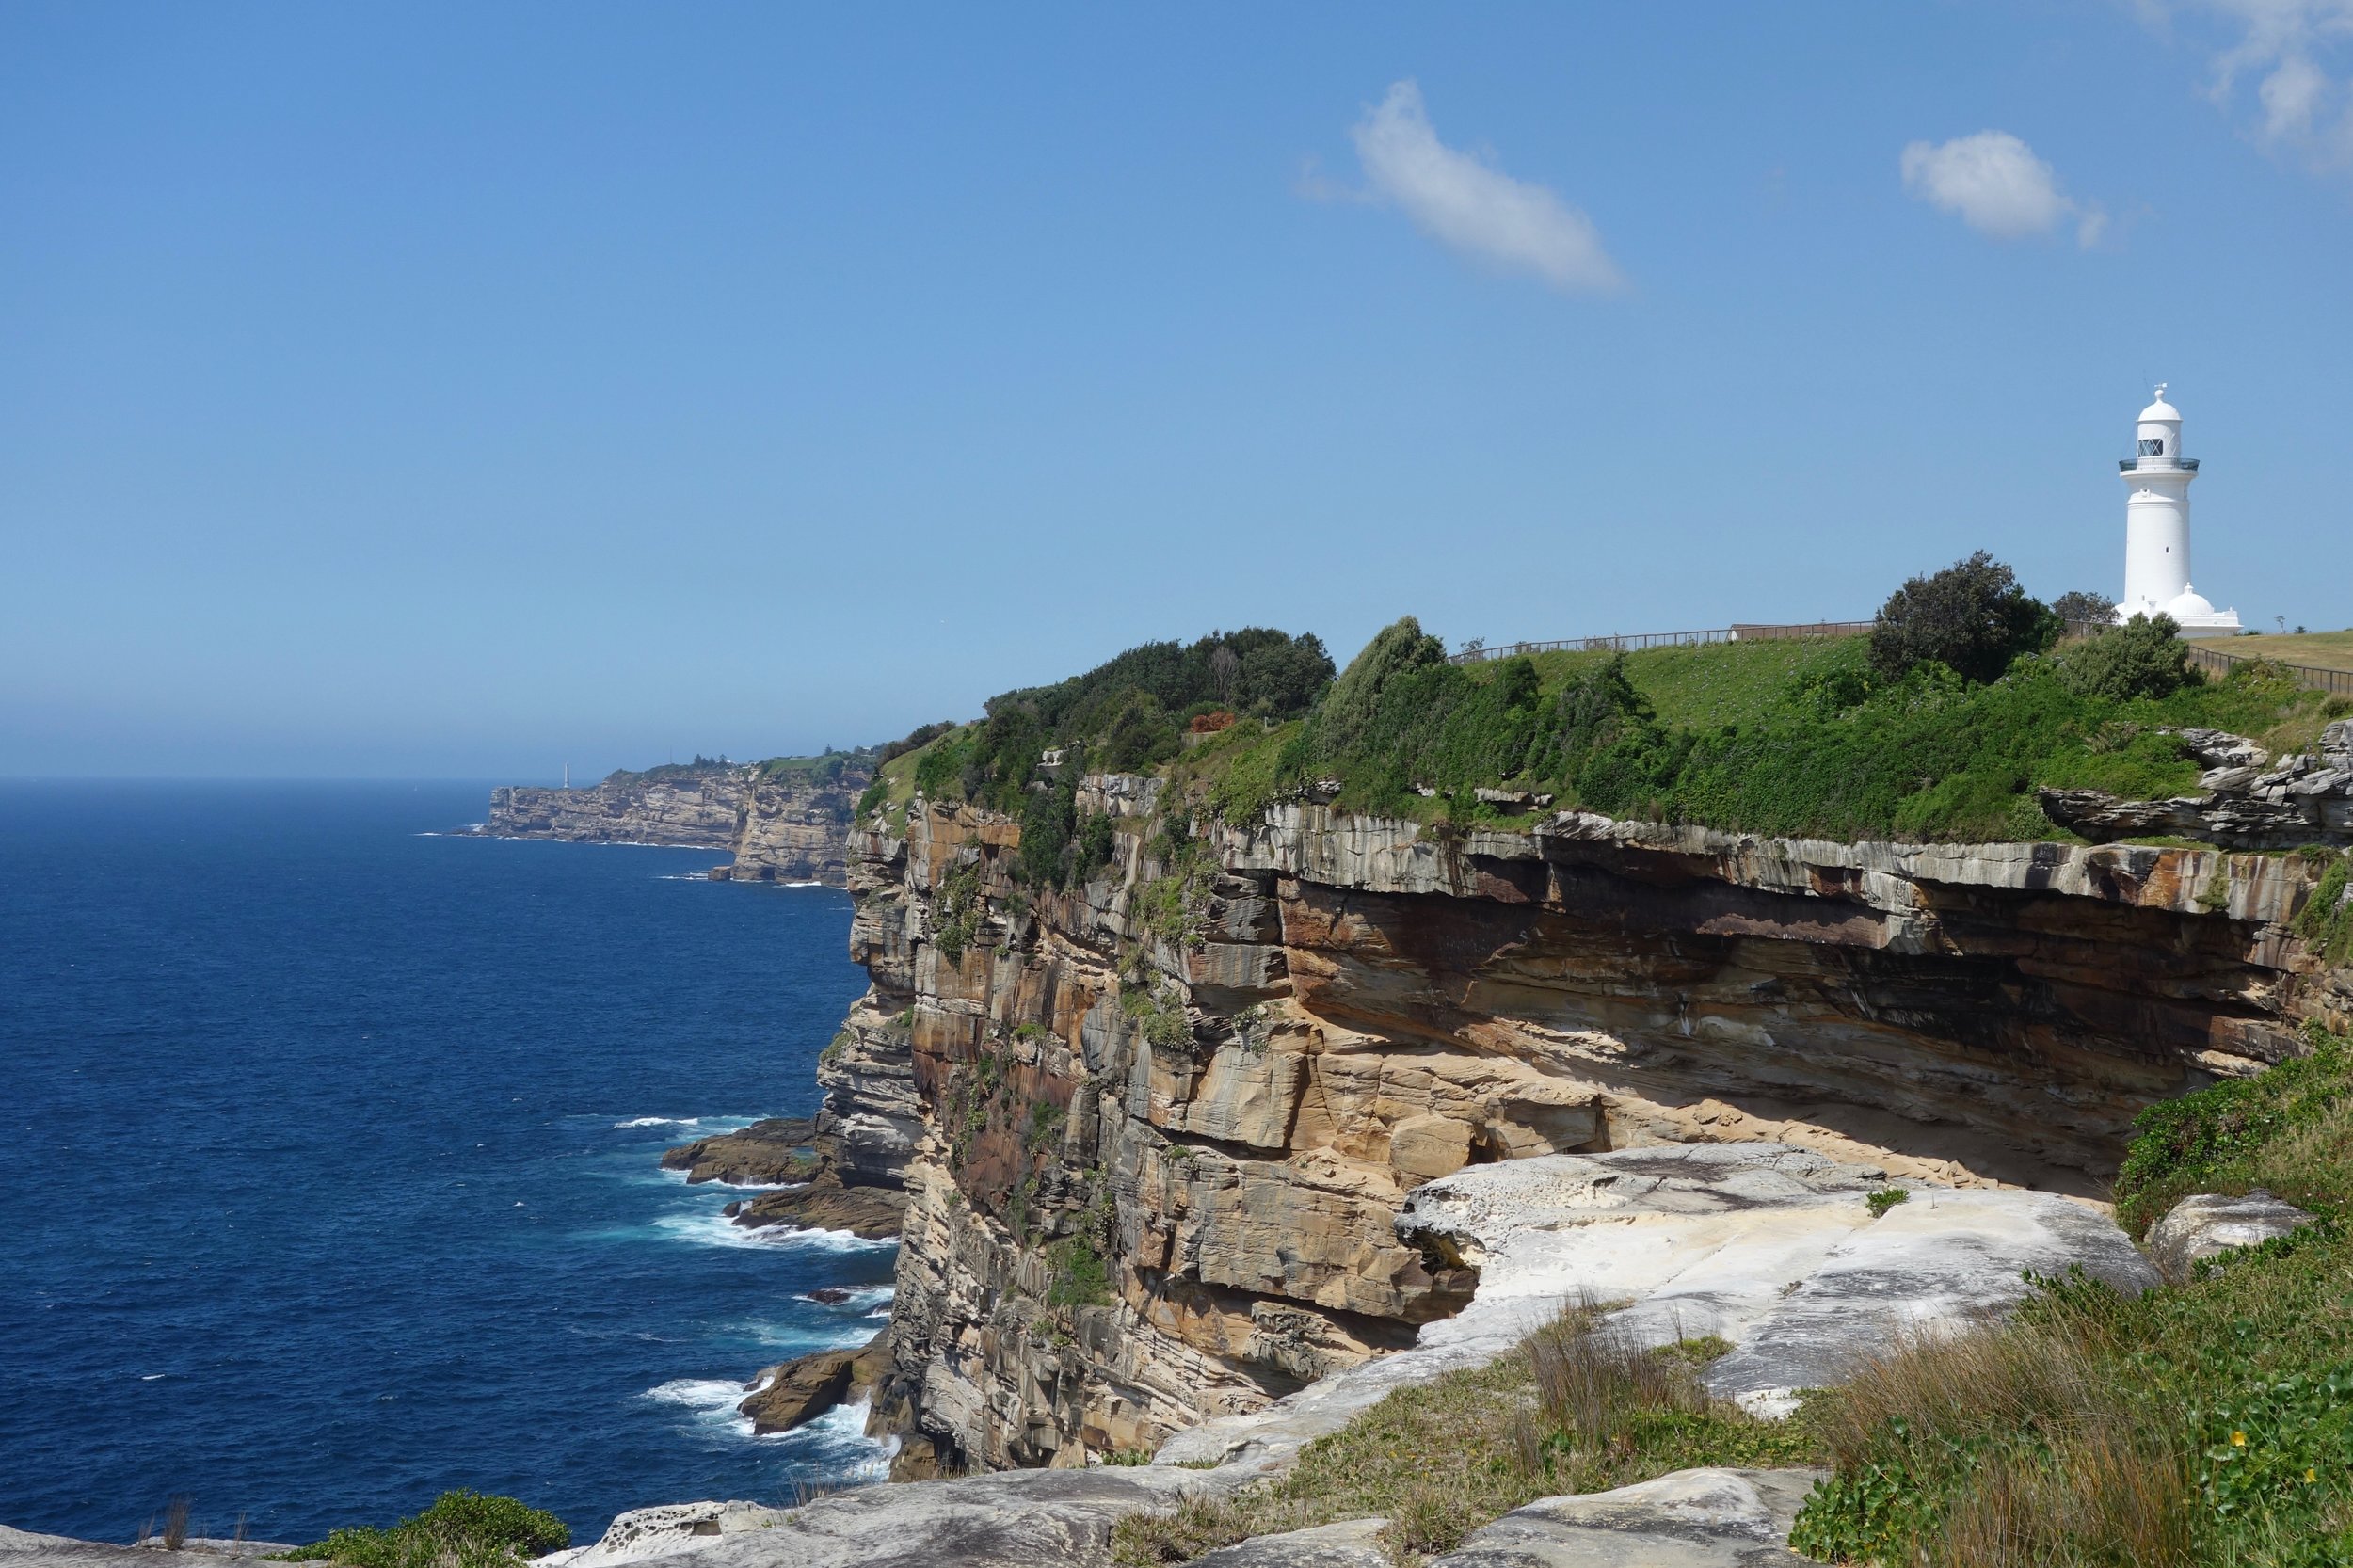 Many miles of trails around Sydney are perched on high oceanside cliffs.